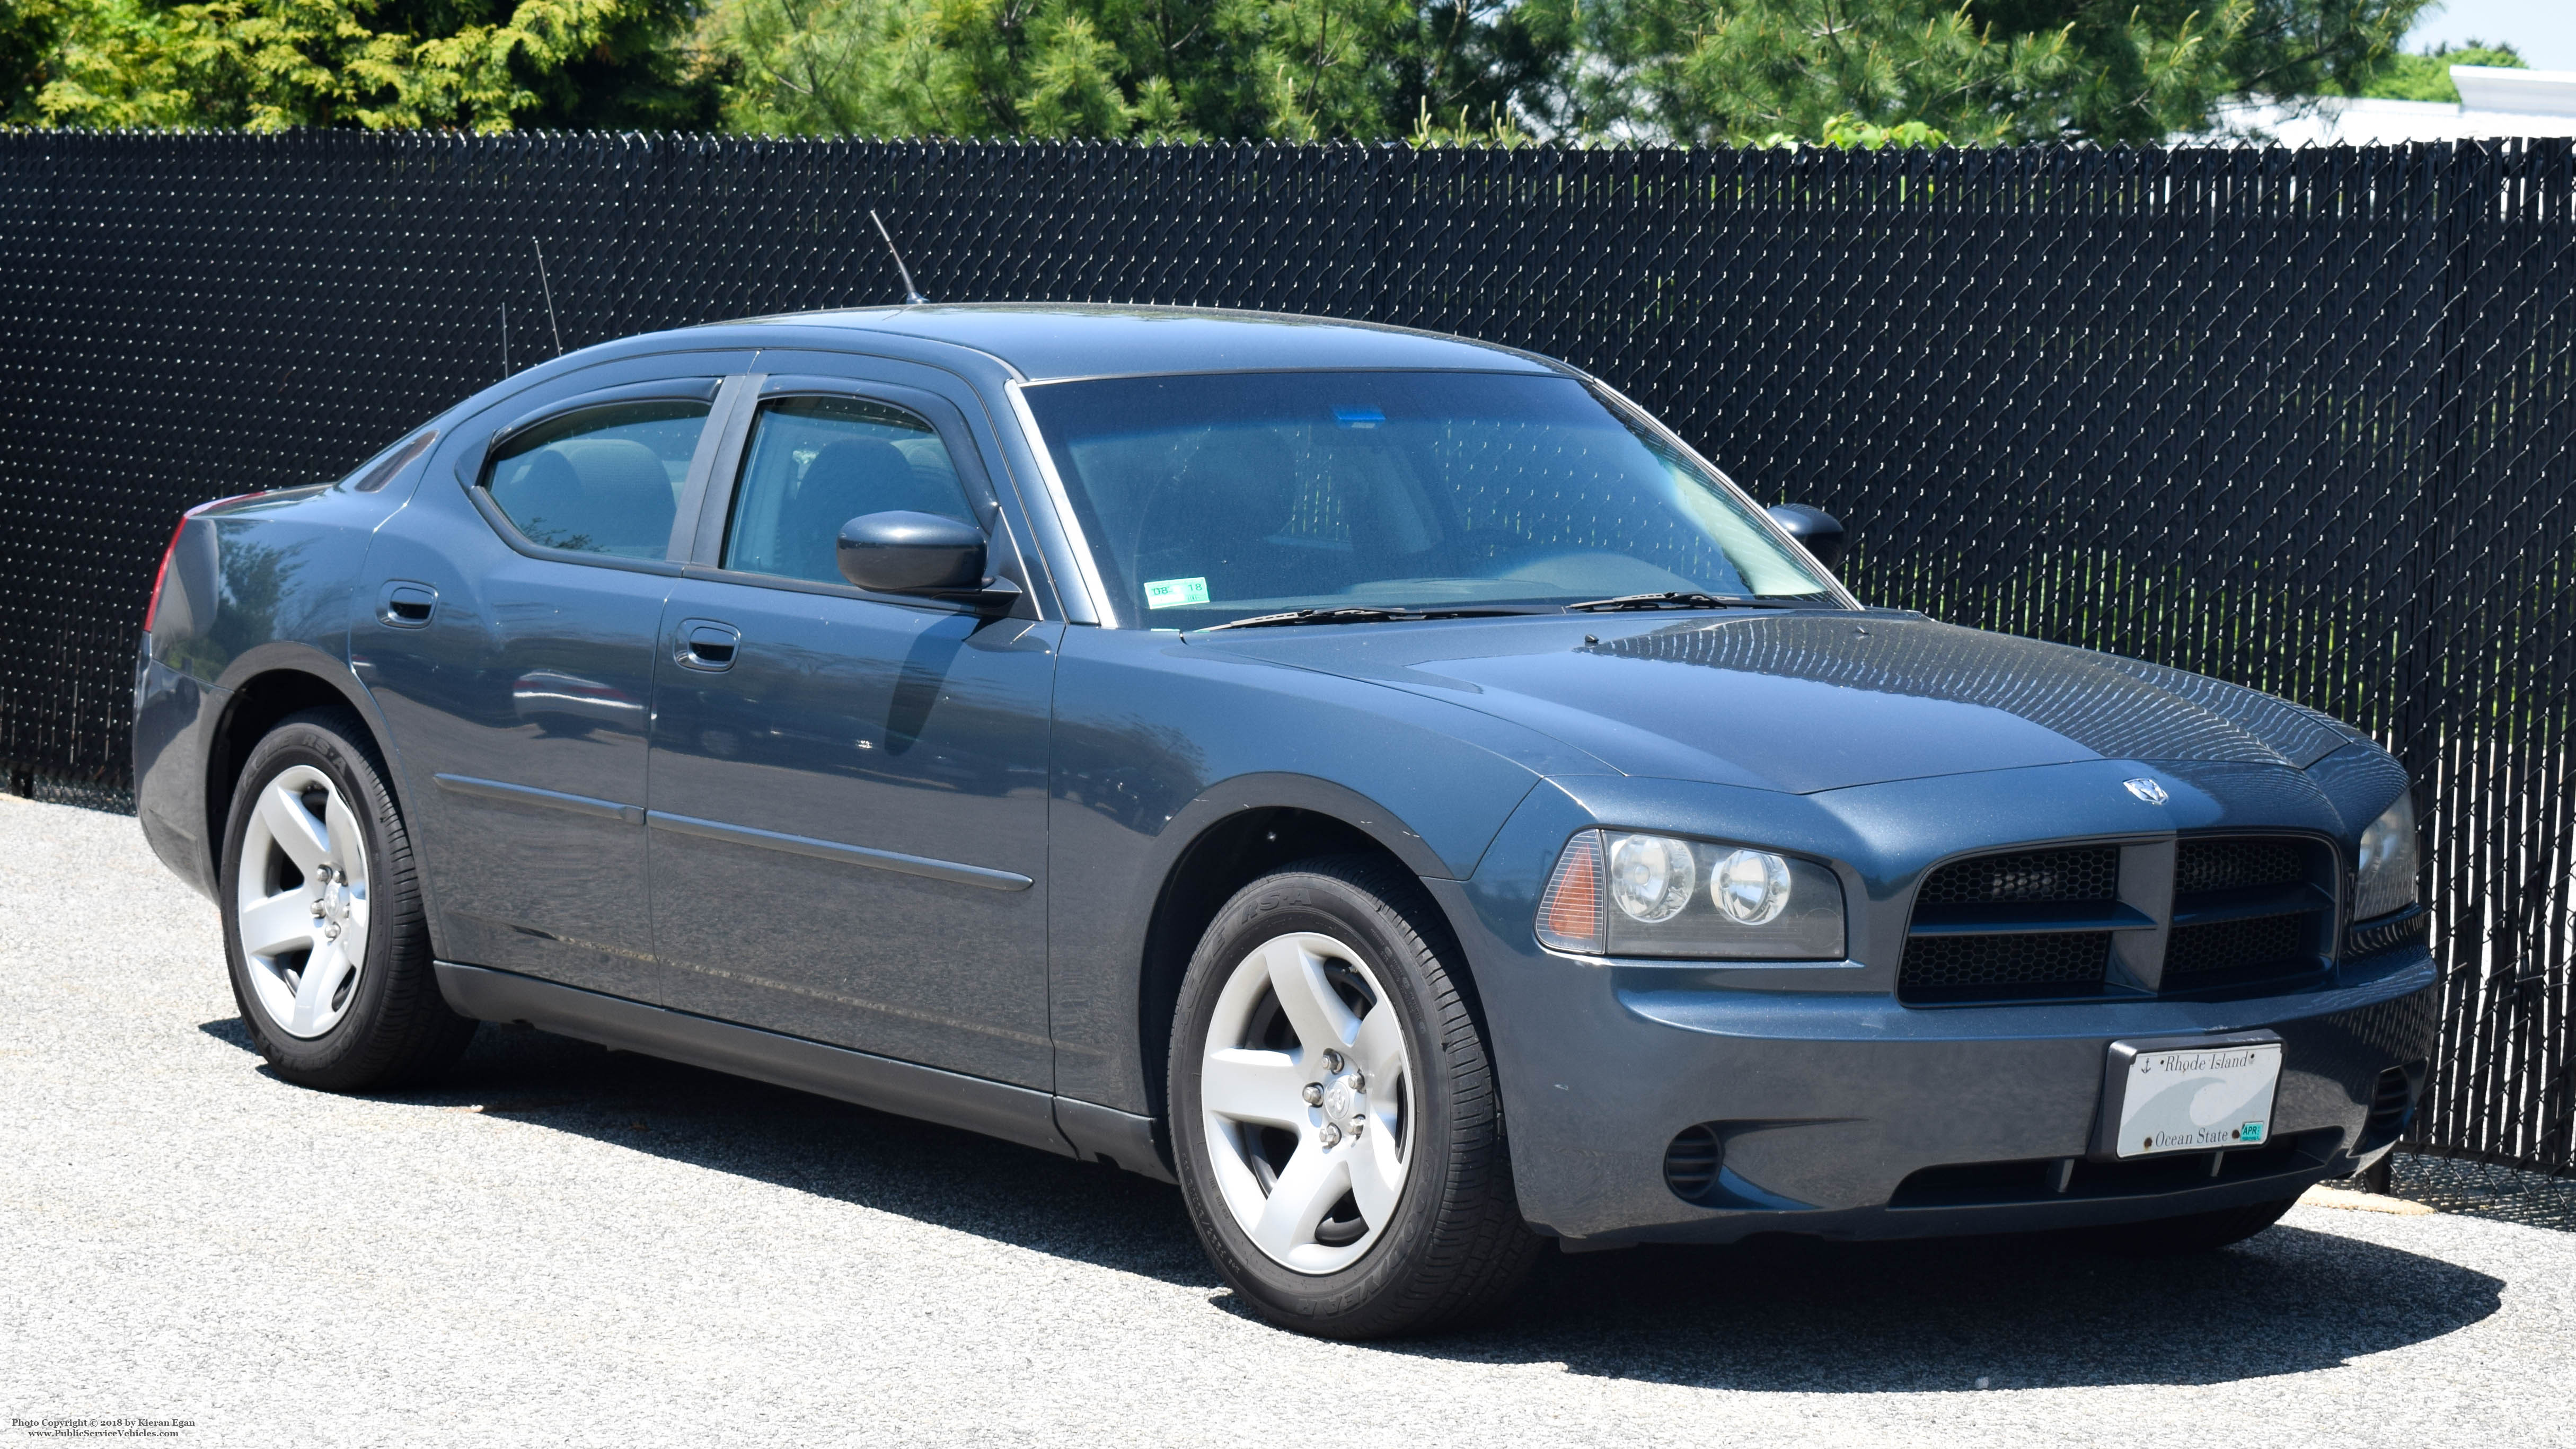 A photo  of Middletown Police
            Cruiser 331, a 2008 Dodge Charger             taken by Kieran Egan